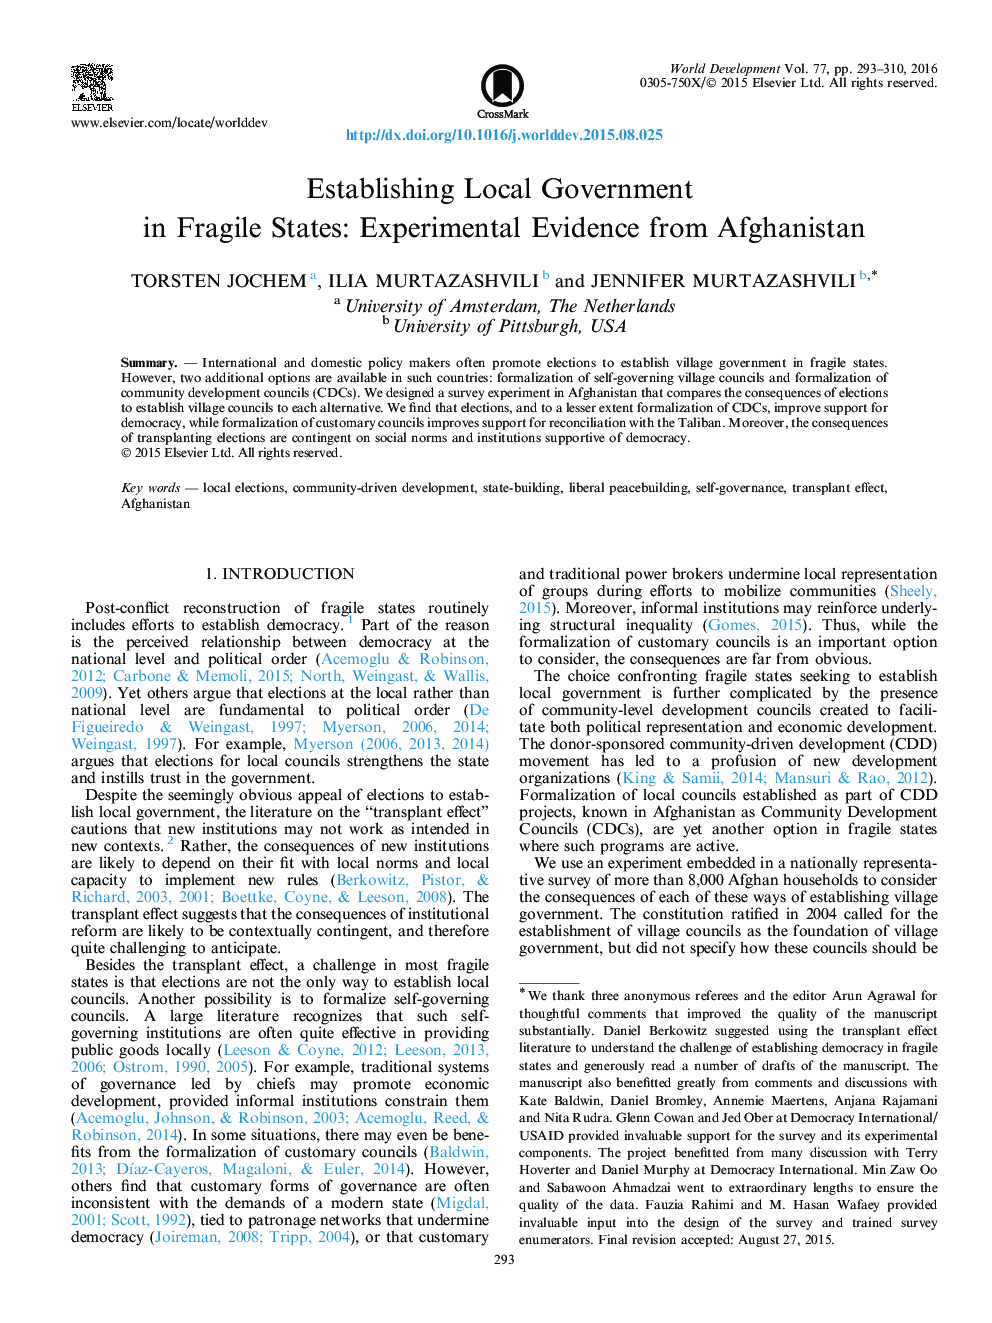 Establishing Local Government in Fragile States: Experimental Evidence from Afghanistan